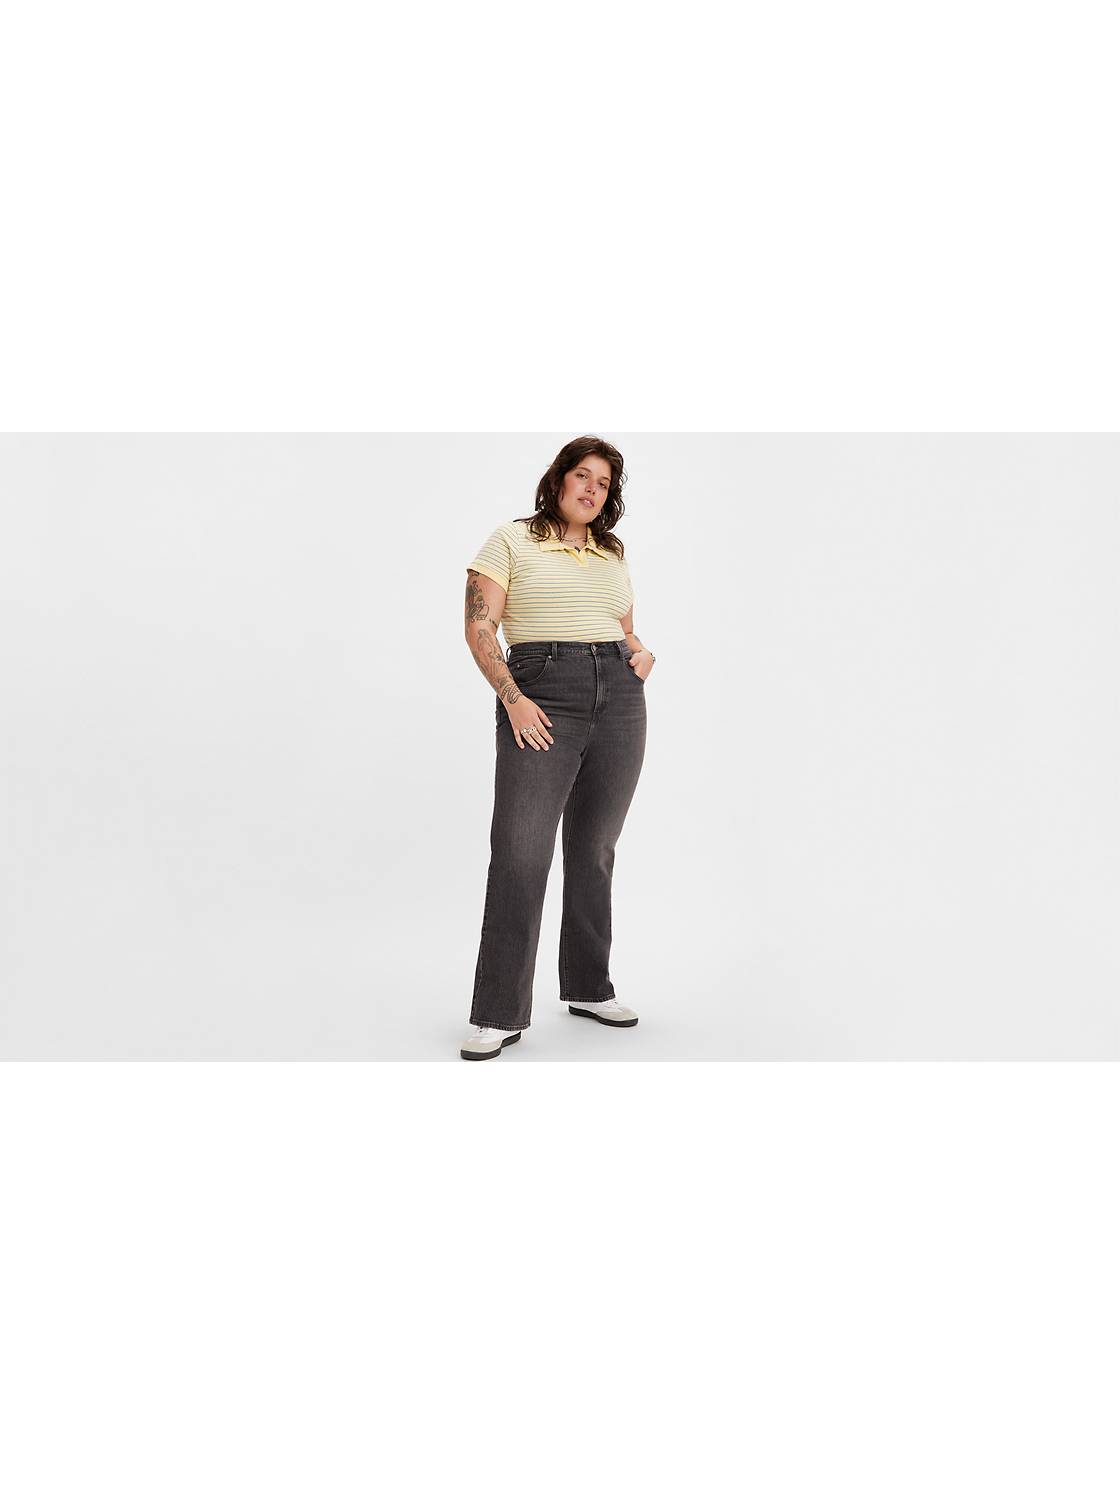 Plus Size High Waisted Jeans for Women